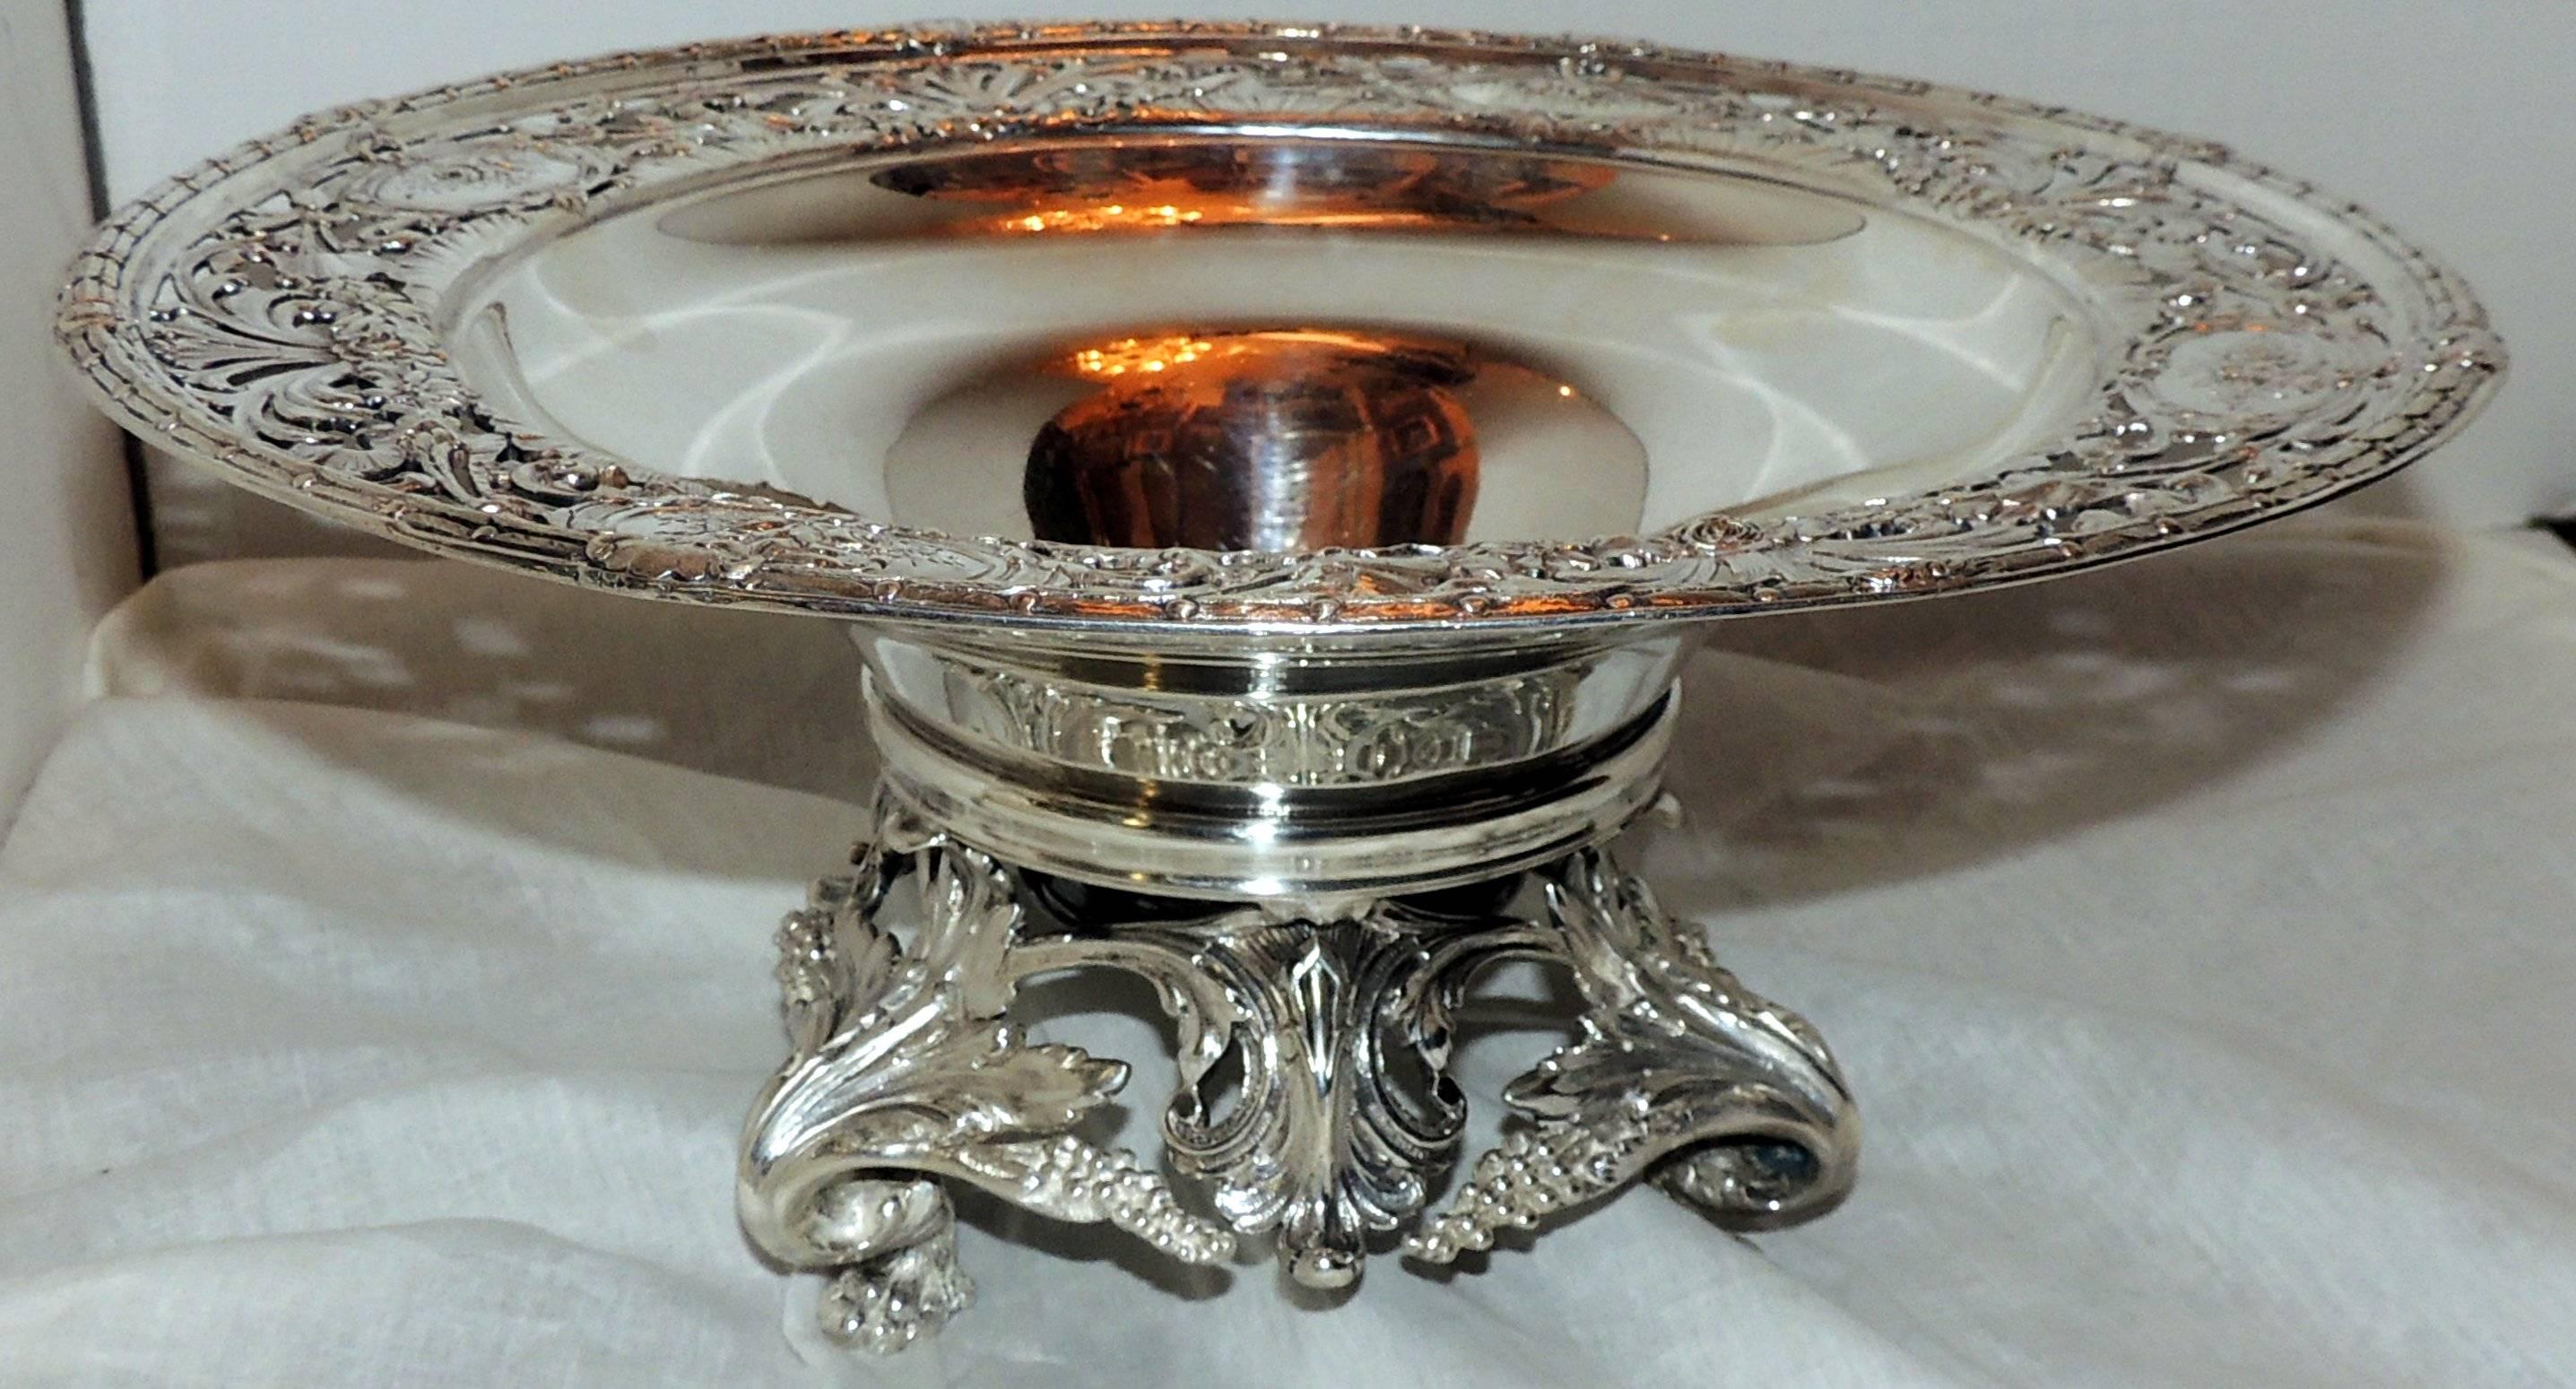 American Monumental Redlich & Co. Sterling Silver Footed Floral Pierced Bowl Centerpiece